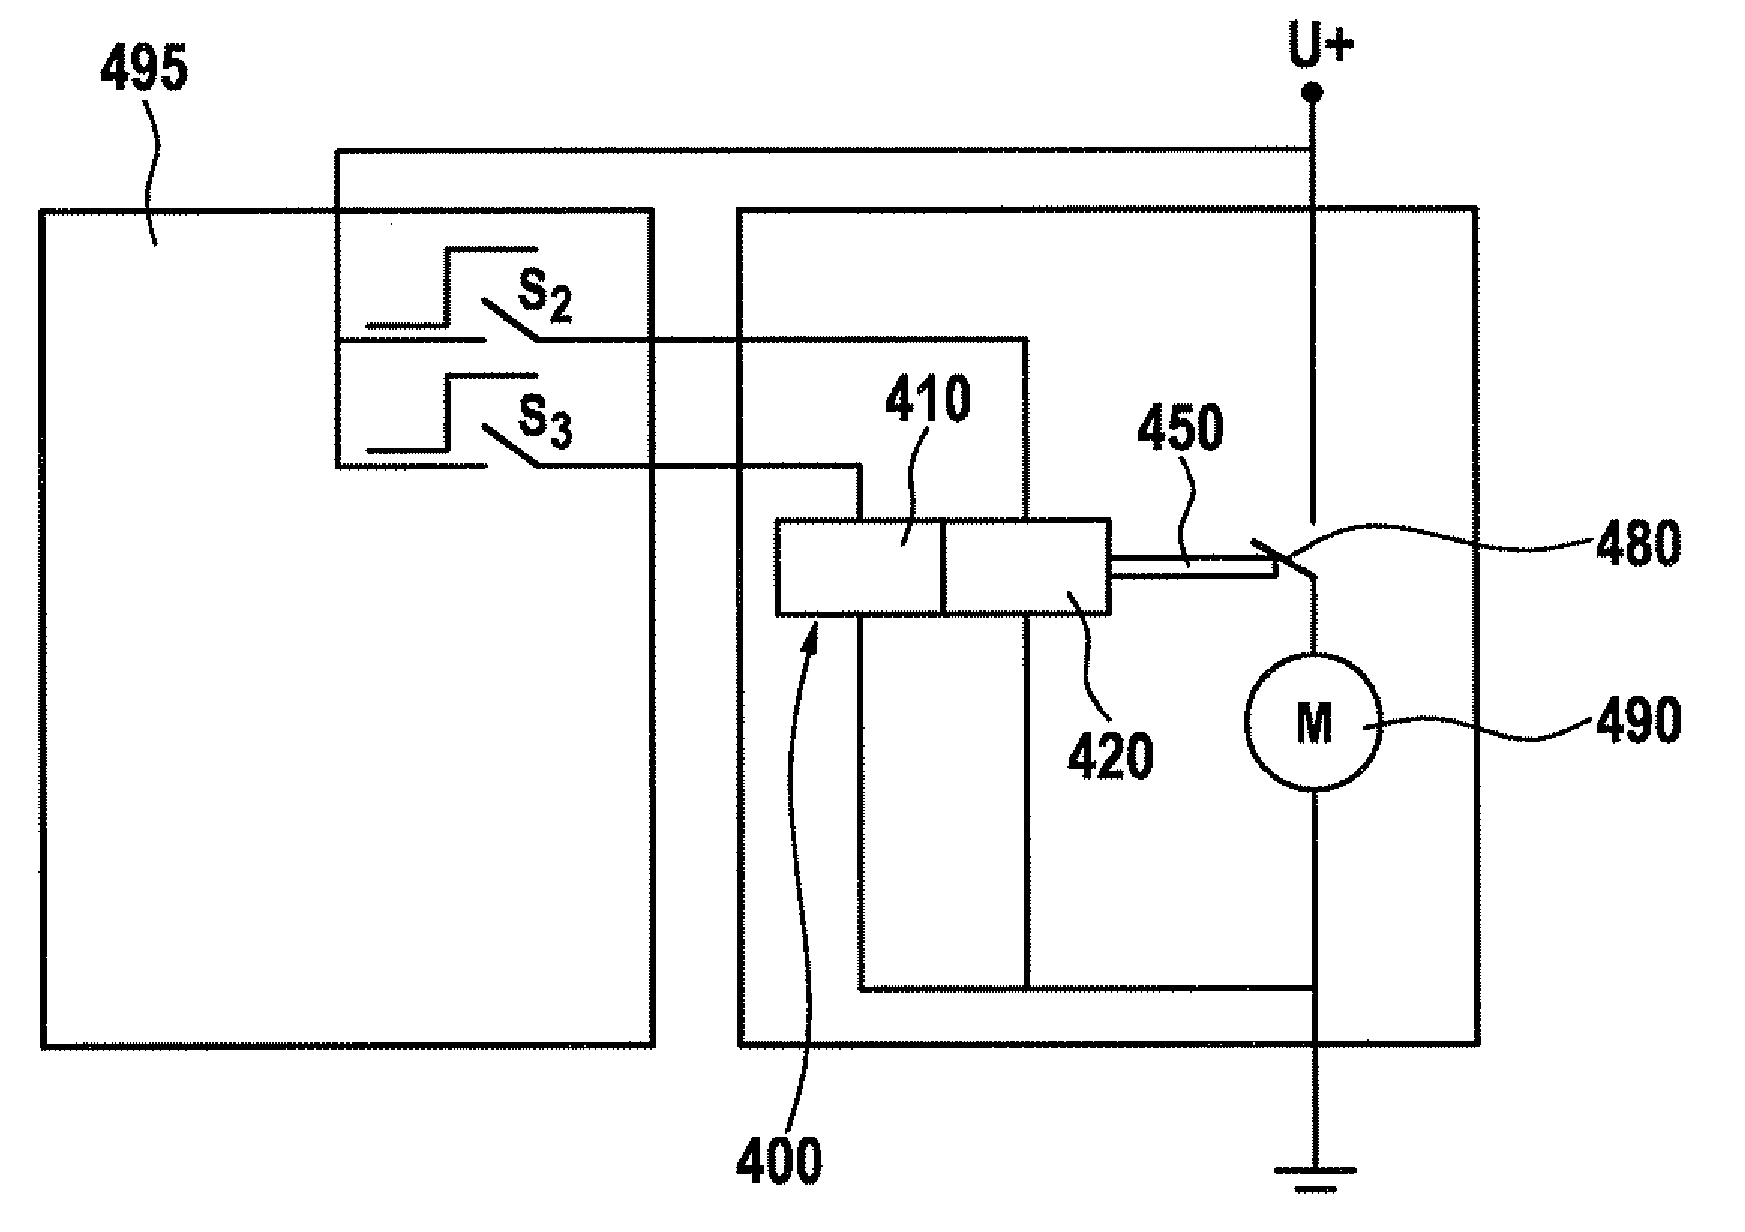 Starter mechanism having a multi-stage plunger relay